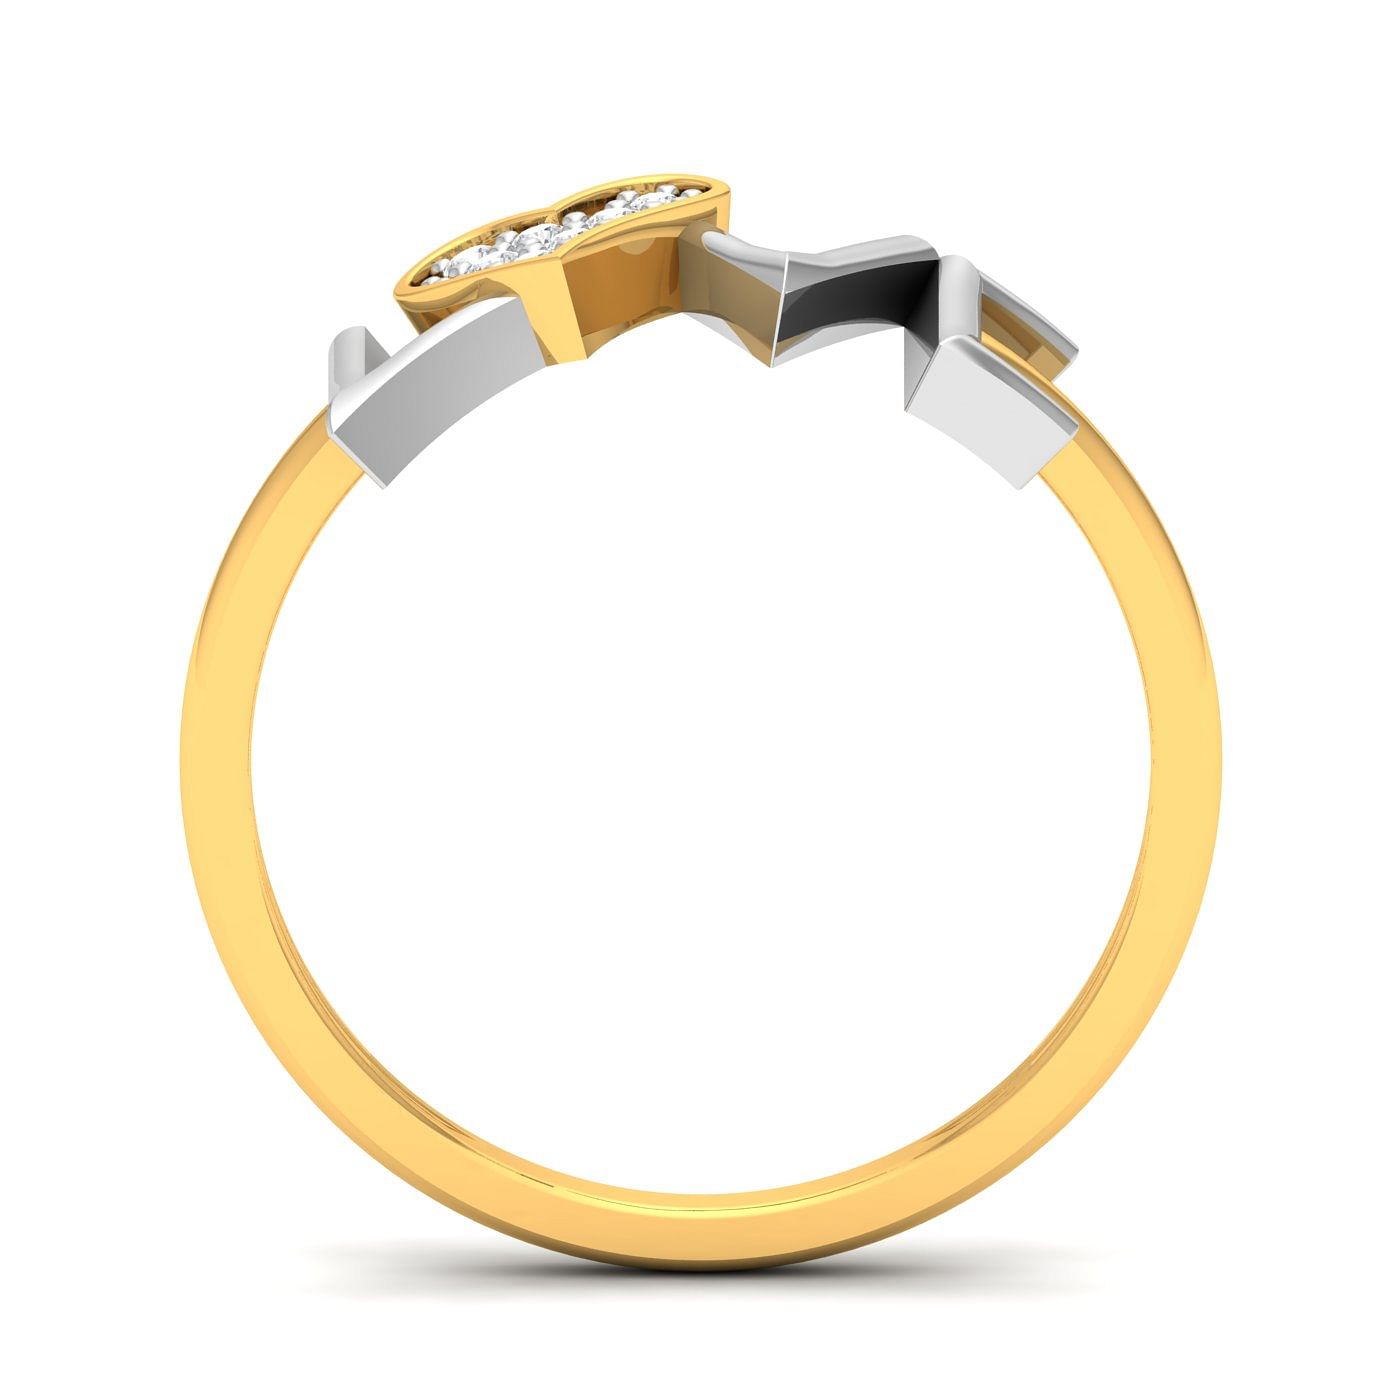 Yellow gold promise Love Initial Wedding Ring for her